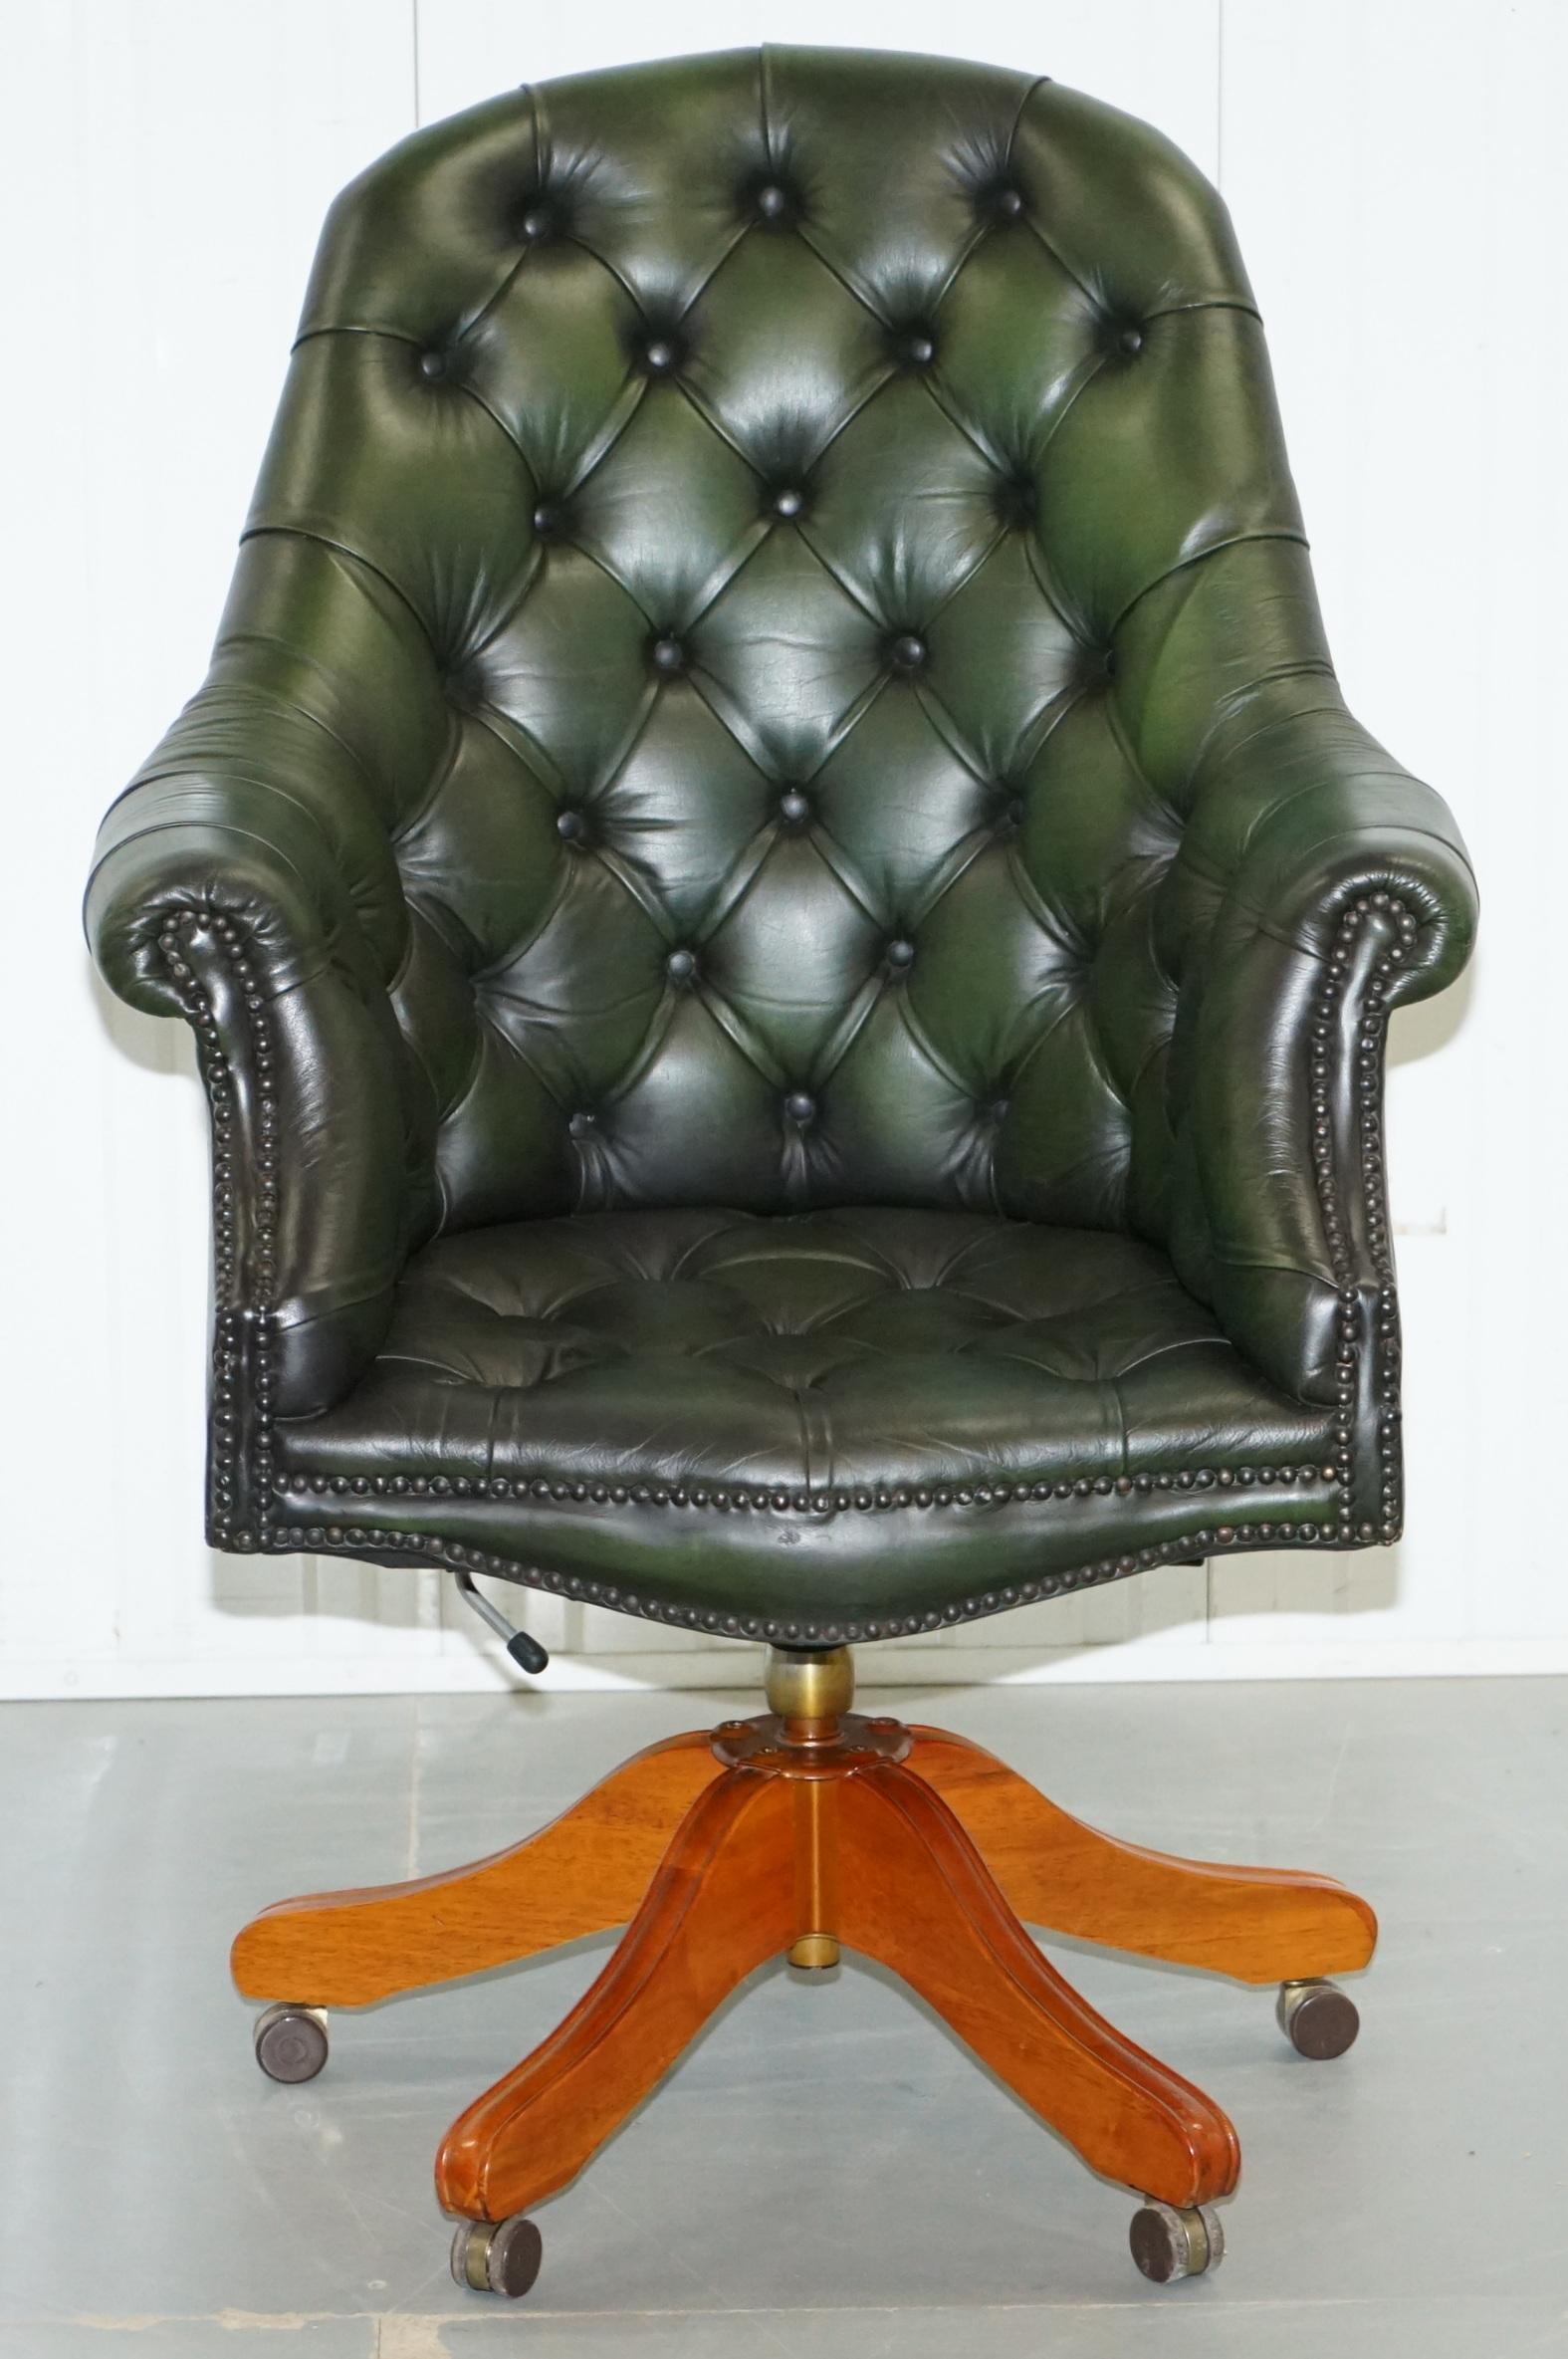 We are delighted to offer for sale this lovely vintage solid beechwood framed with vintage green leather upholstery Chesterfield Directors captains office chair

A really good looking and well-made piece, the upholstery is in tidy order